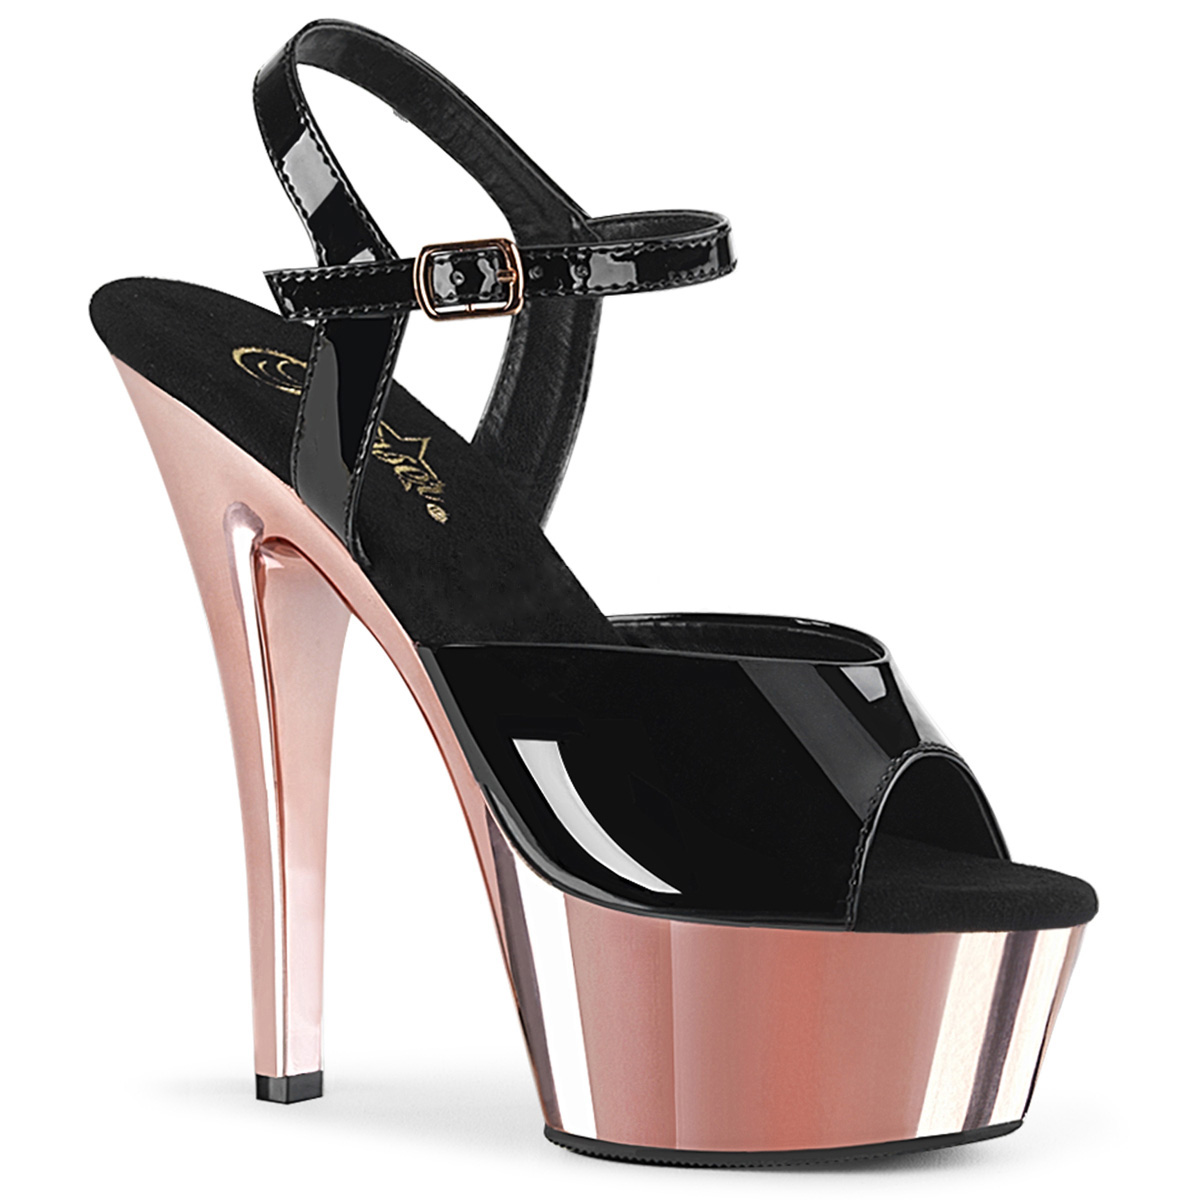 black and rose gold high heels